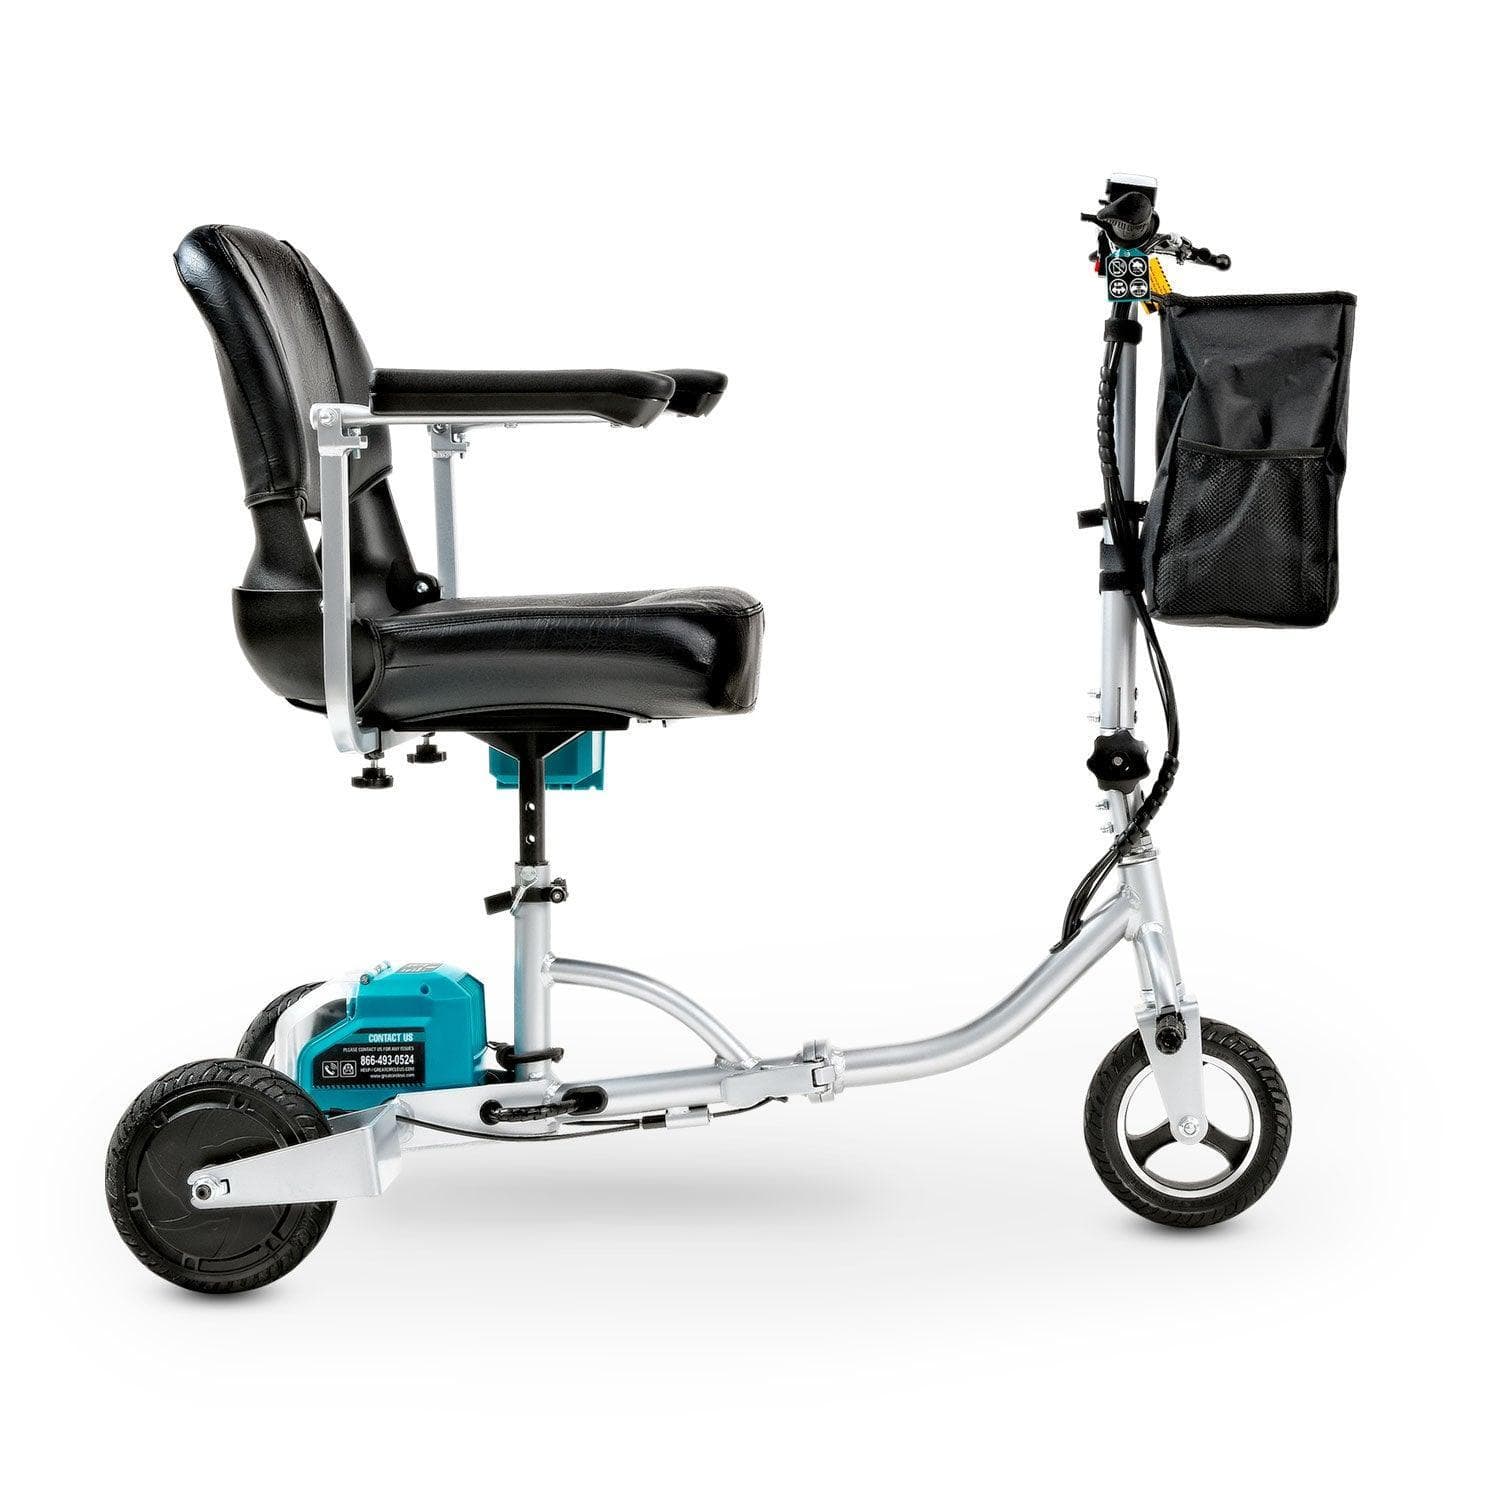 G Brand Folding Electric Mobility Scooter Plus - 48V 2Ah Removable Battery, Lightweight, Long Range + Extra Battery (Blue) Mobility Scooter